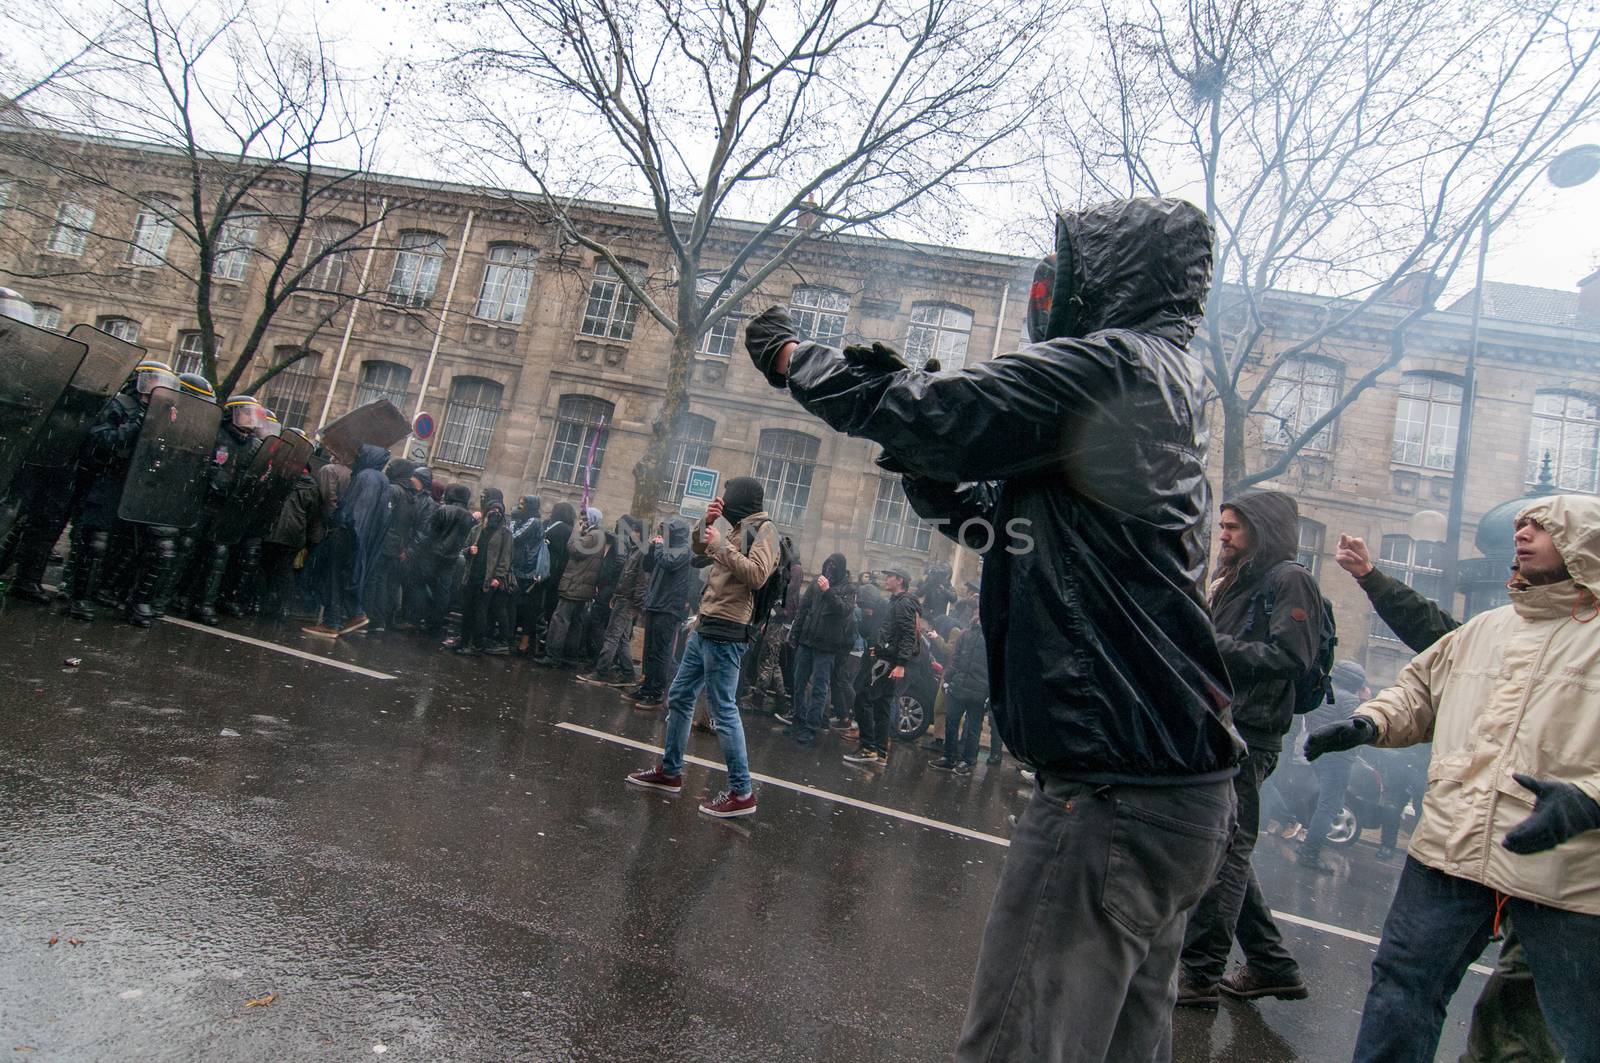 FRANCE, Marseille: Protesters face police during a demonstration against the French government's planned labour law reforms on March 31, 2016 in Paris. France faced fresh protests over labour reforms just a day after the beleaguered government of President Francois Hollande was forced into an embarrassing U-turn over constitutional changes.